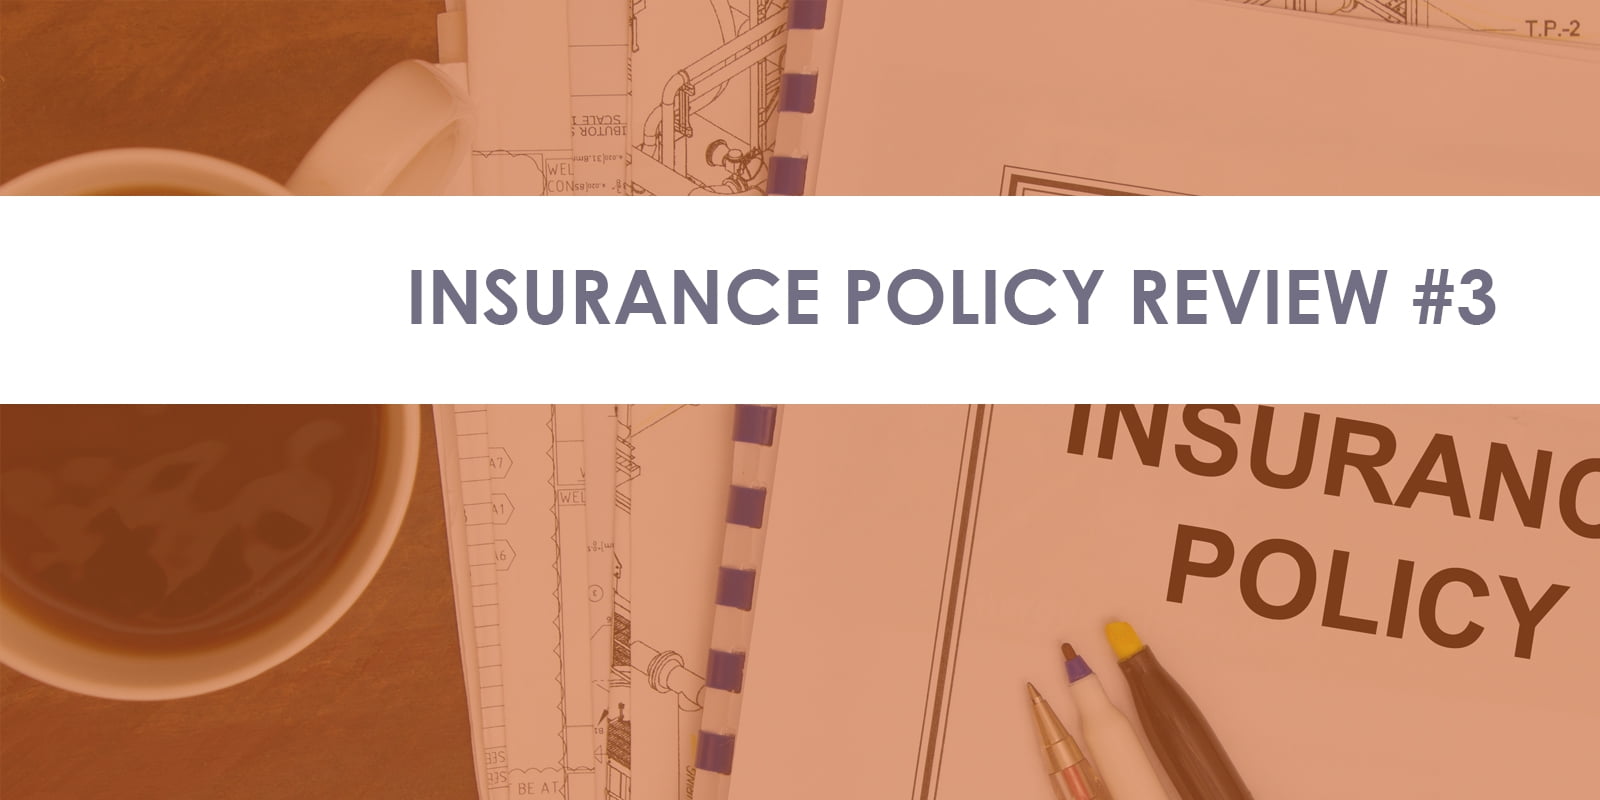 Insurance Policy Examples: Bad Policy #3